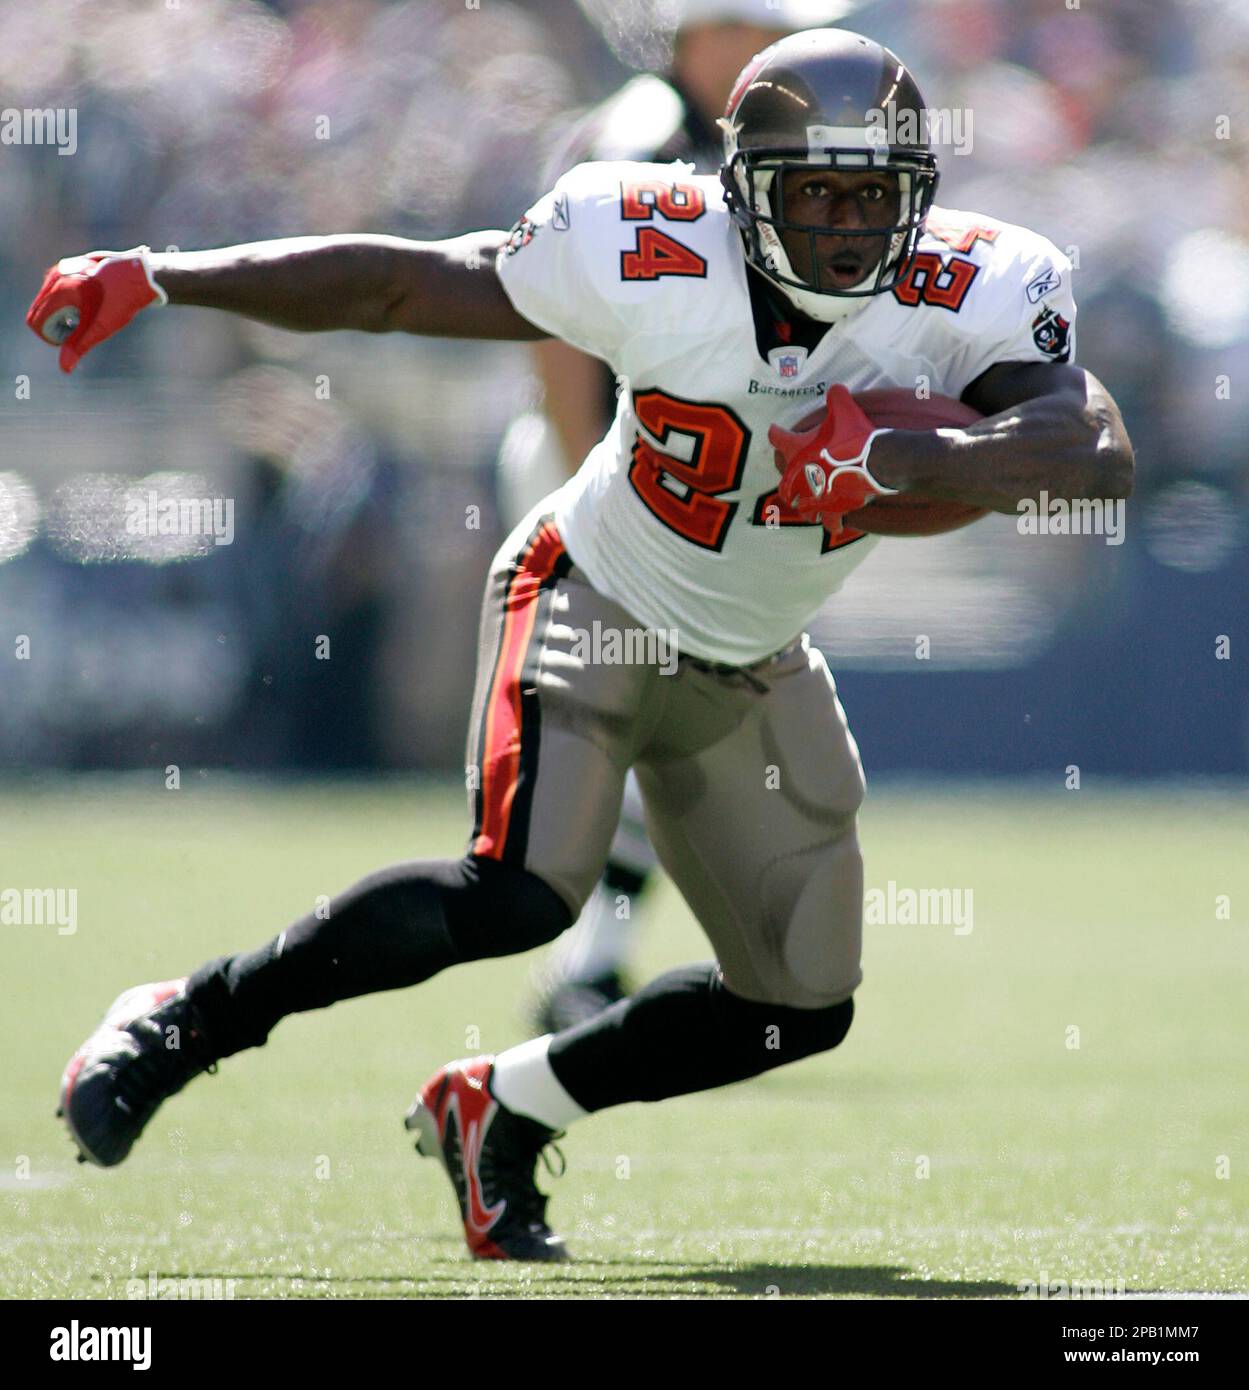 ** FILE ** Tampa Bay Buccaneers running back Carnell Williams runs the ball in the first half in this Sept. 9, 2007 file photo, in a NFL football game against the Seattle Seahawks at Qwest Field in Seattle. Williams will be unavailable for this Sundays game against the Indianapolis Colts in Indianapolis. (AP Photo/Ted S. Warren) Stock Photo